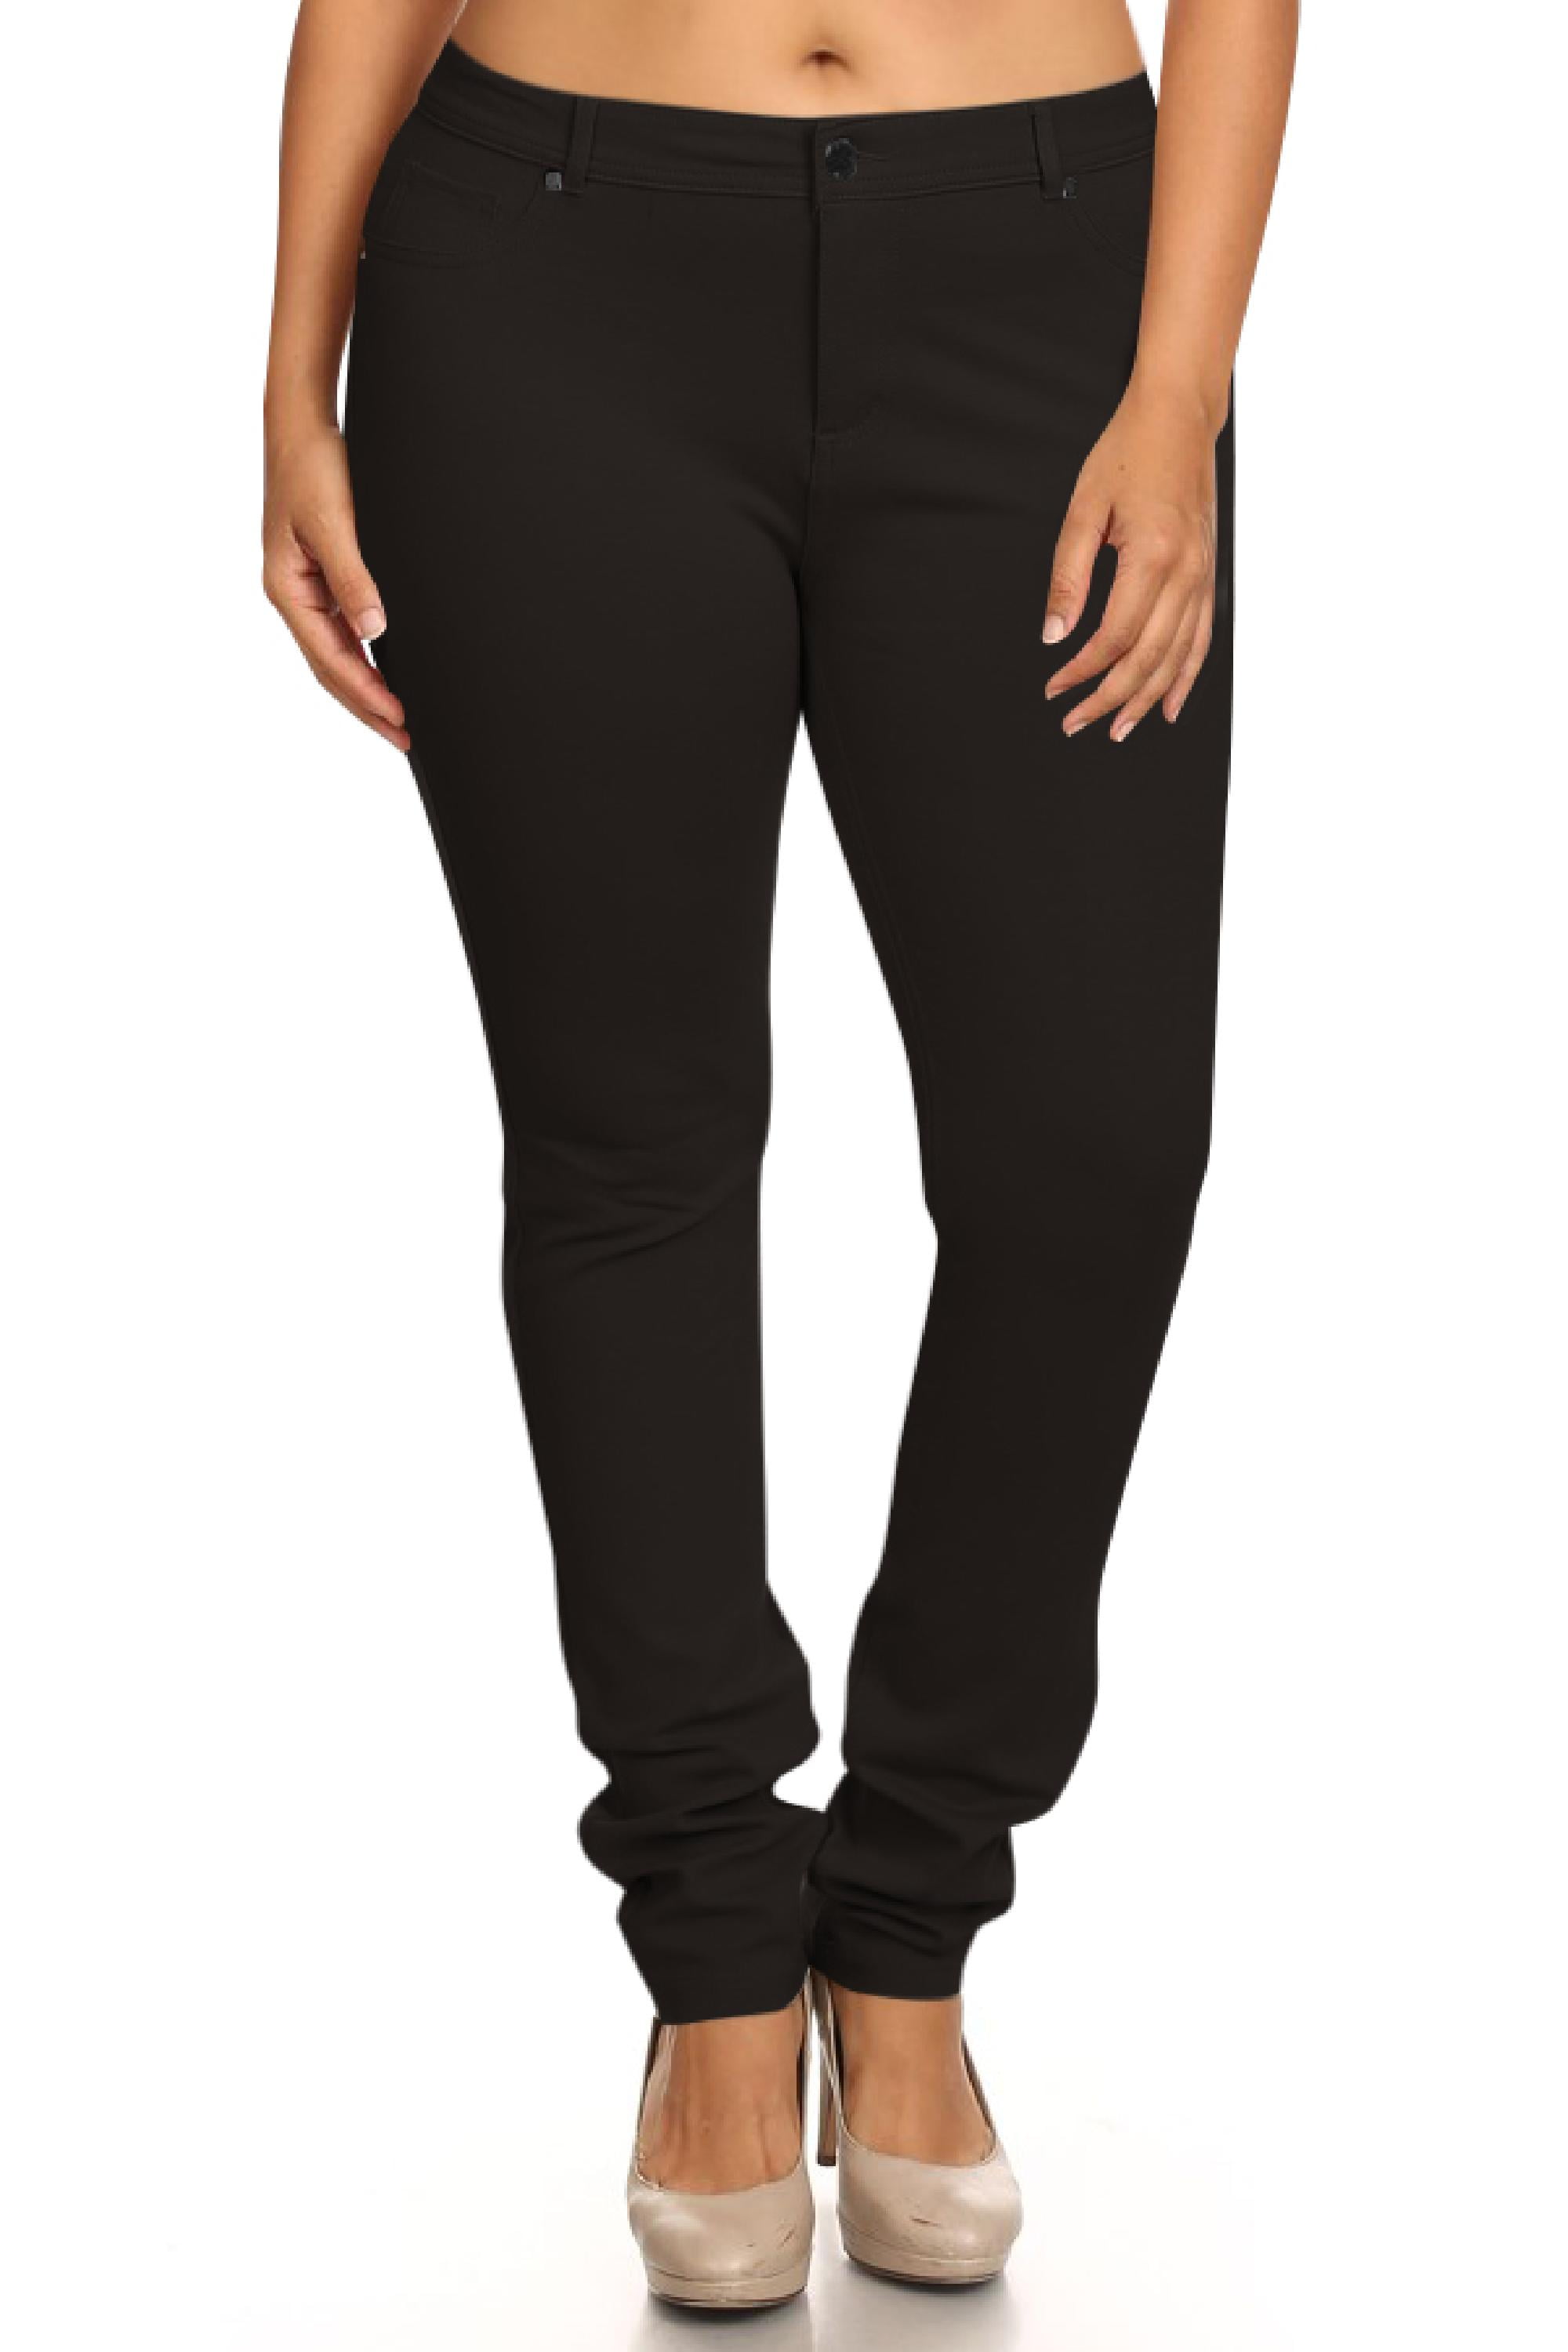 Moa Collection - Women's Plus Size Casual Stretch Knit Jeggings ...